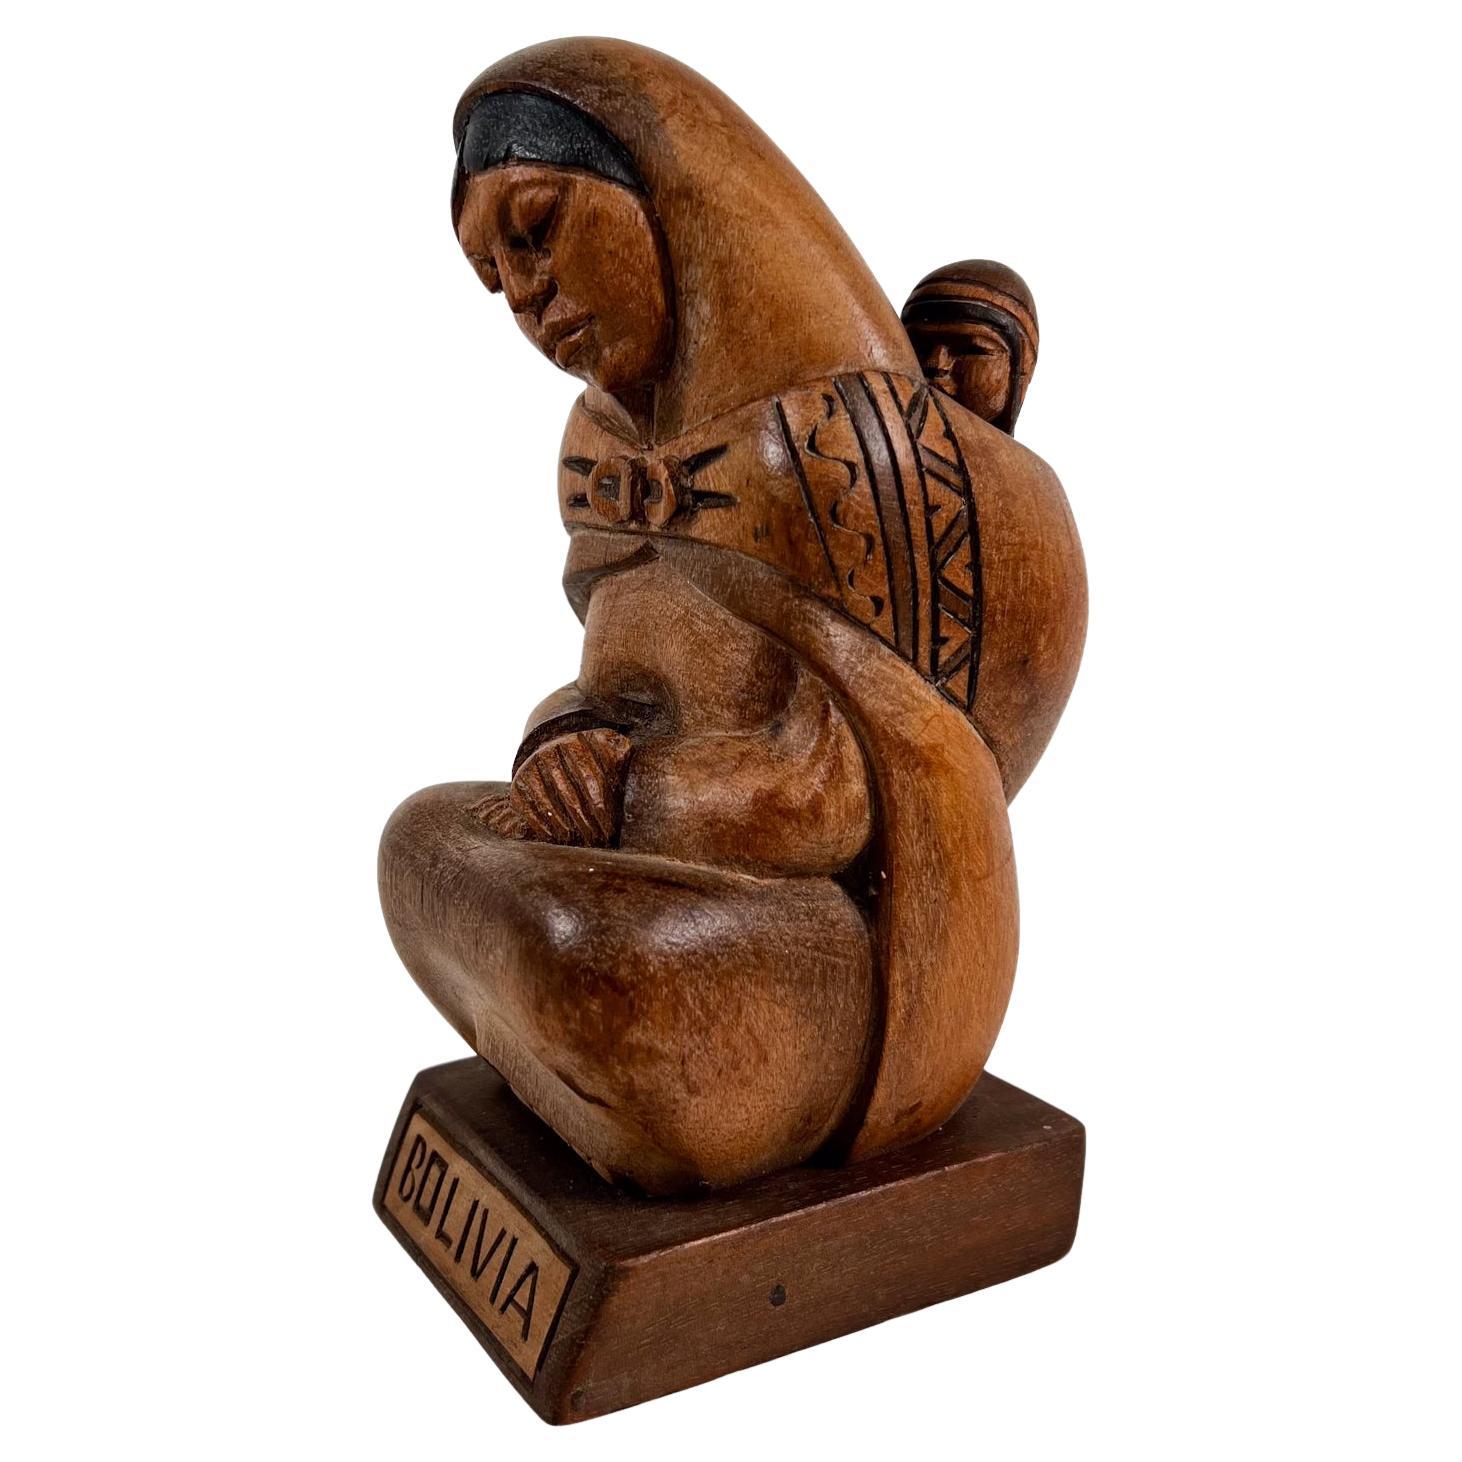 1960s Bolivia Wood Hand Carving Mother and Child